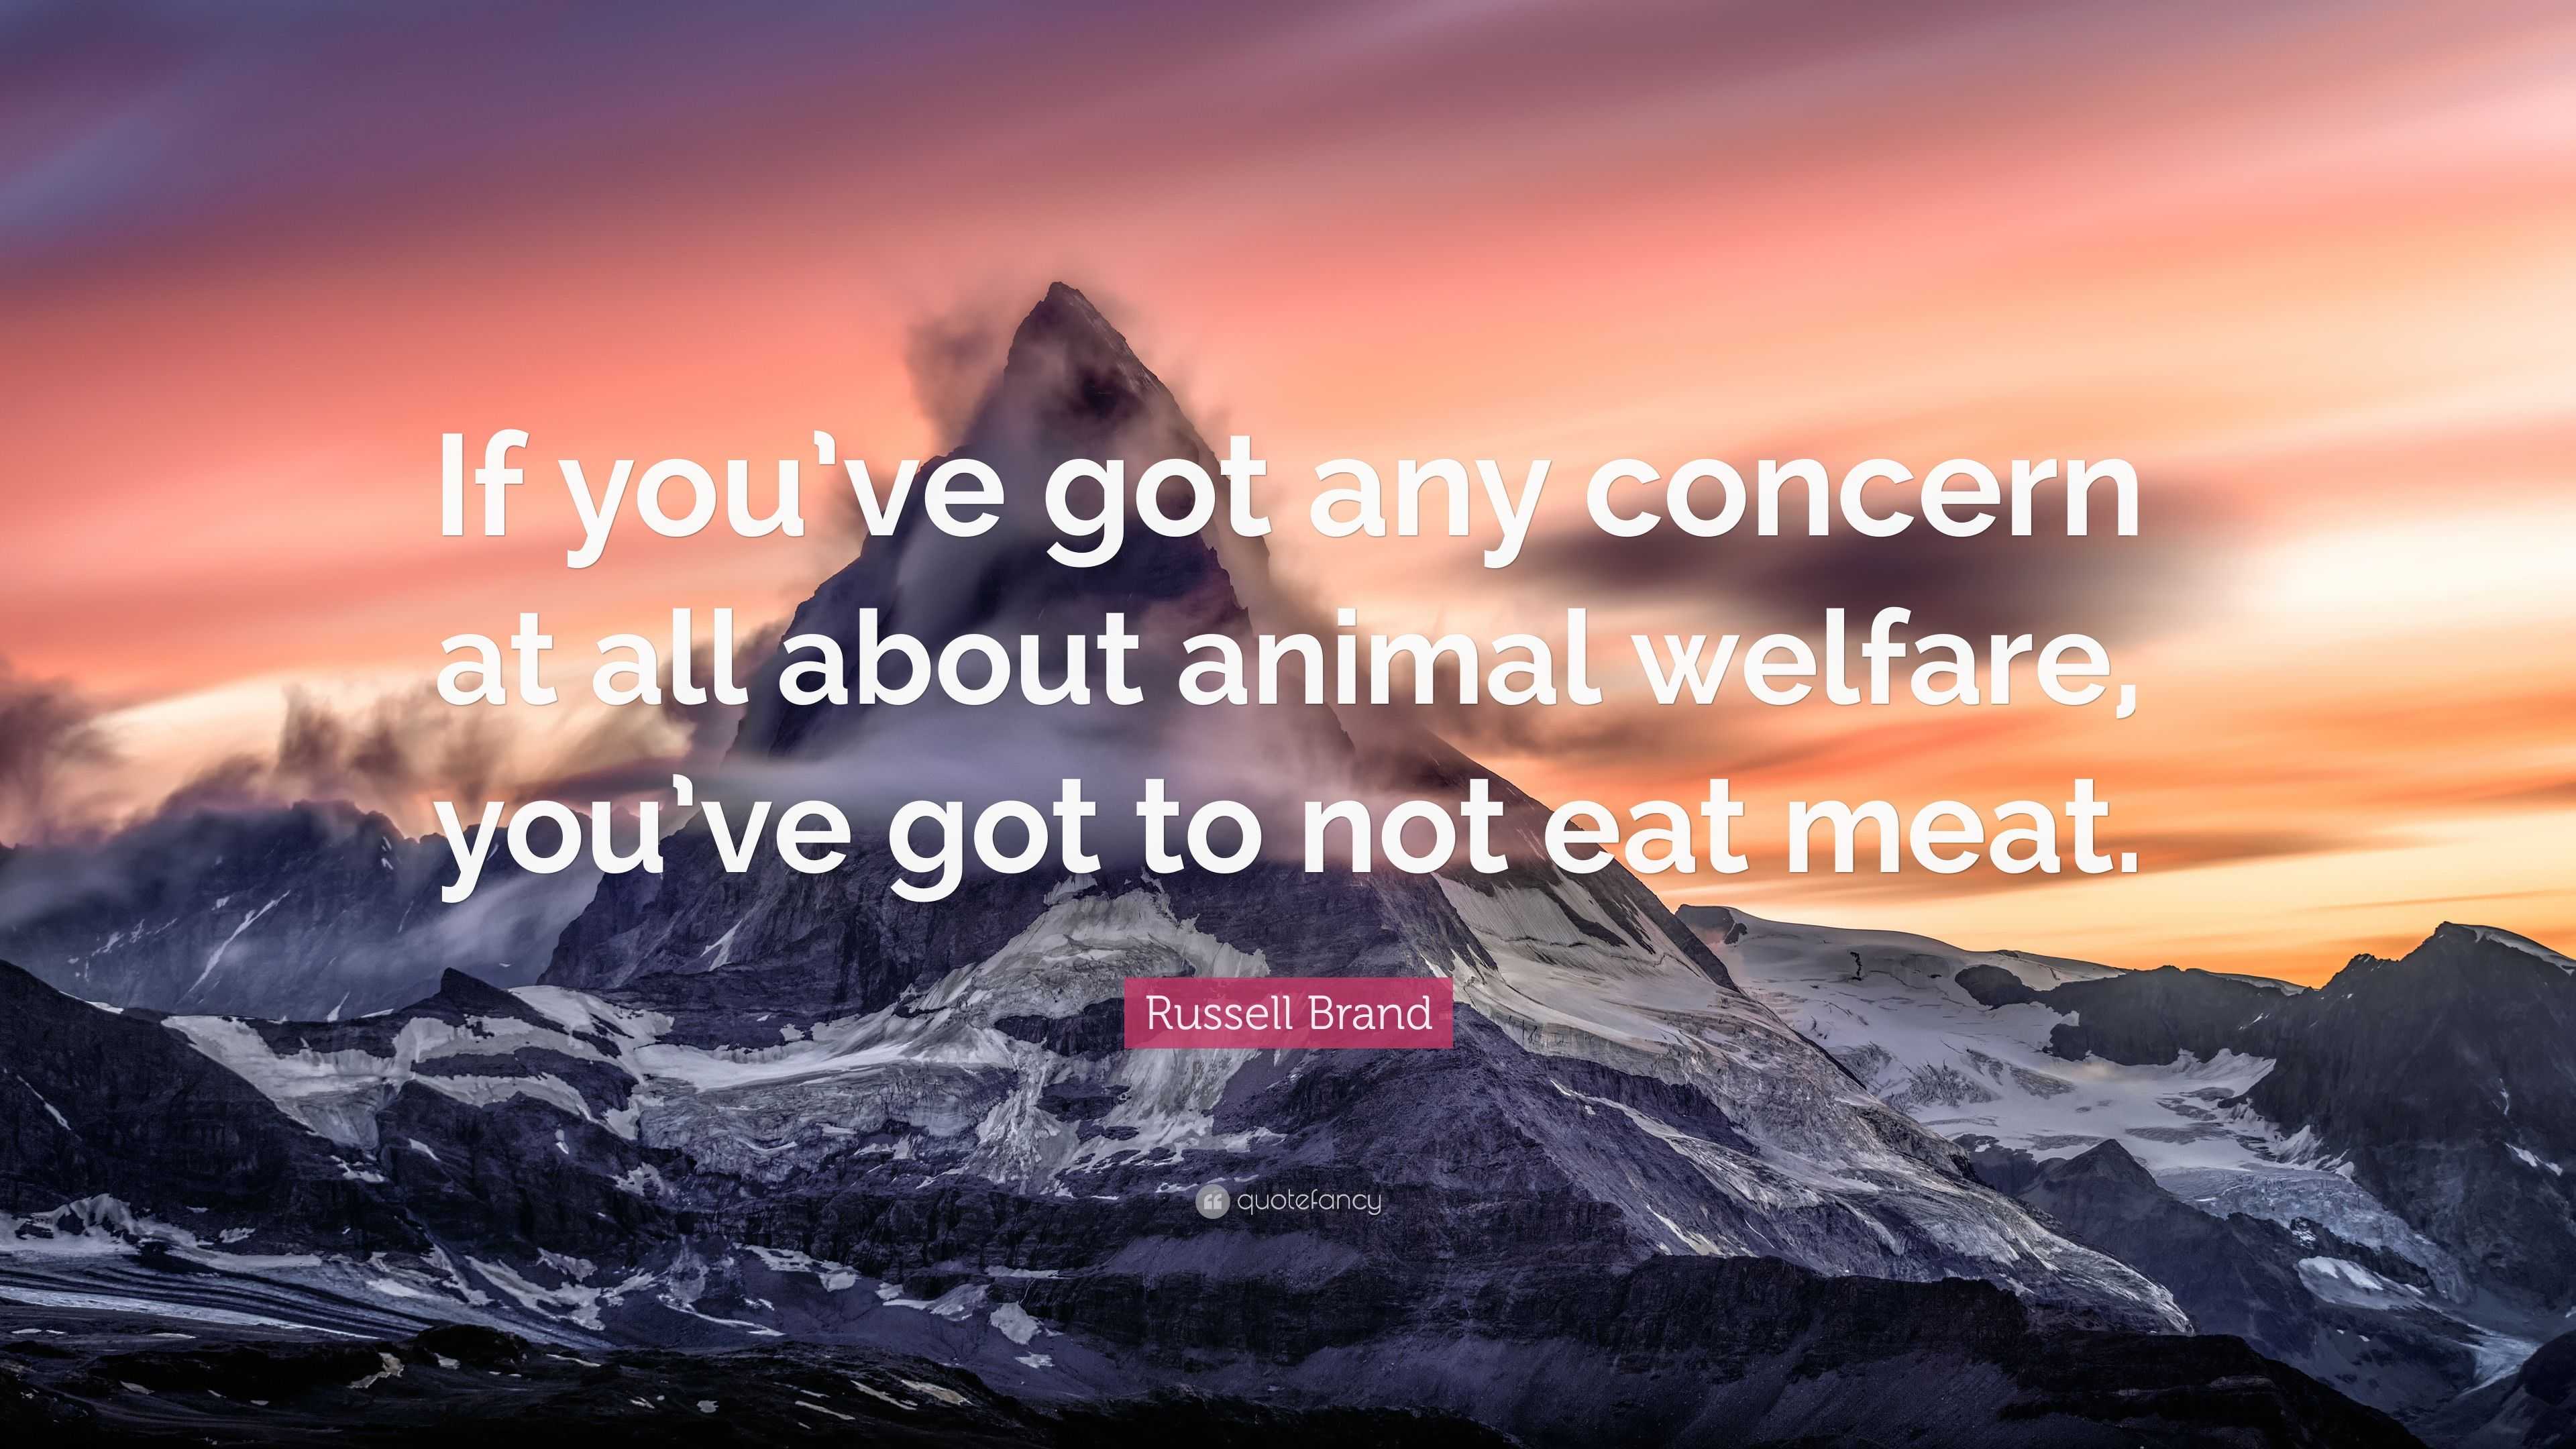 Russell Brand Quote: “If you've got any concern at all about animal welfare,  you've